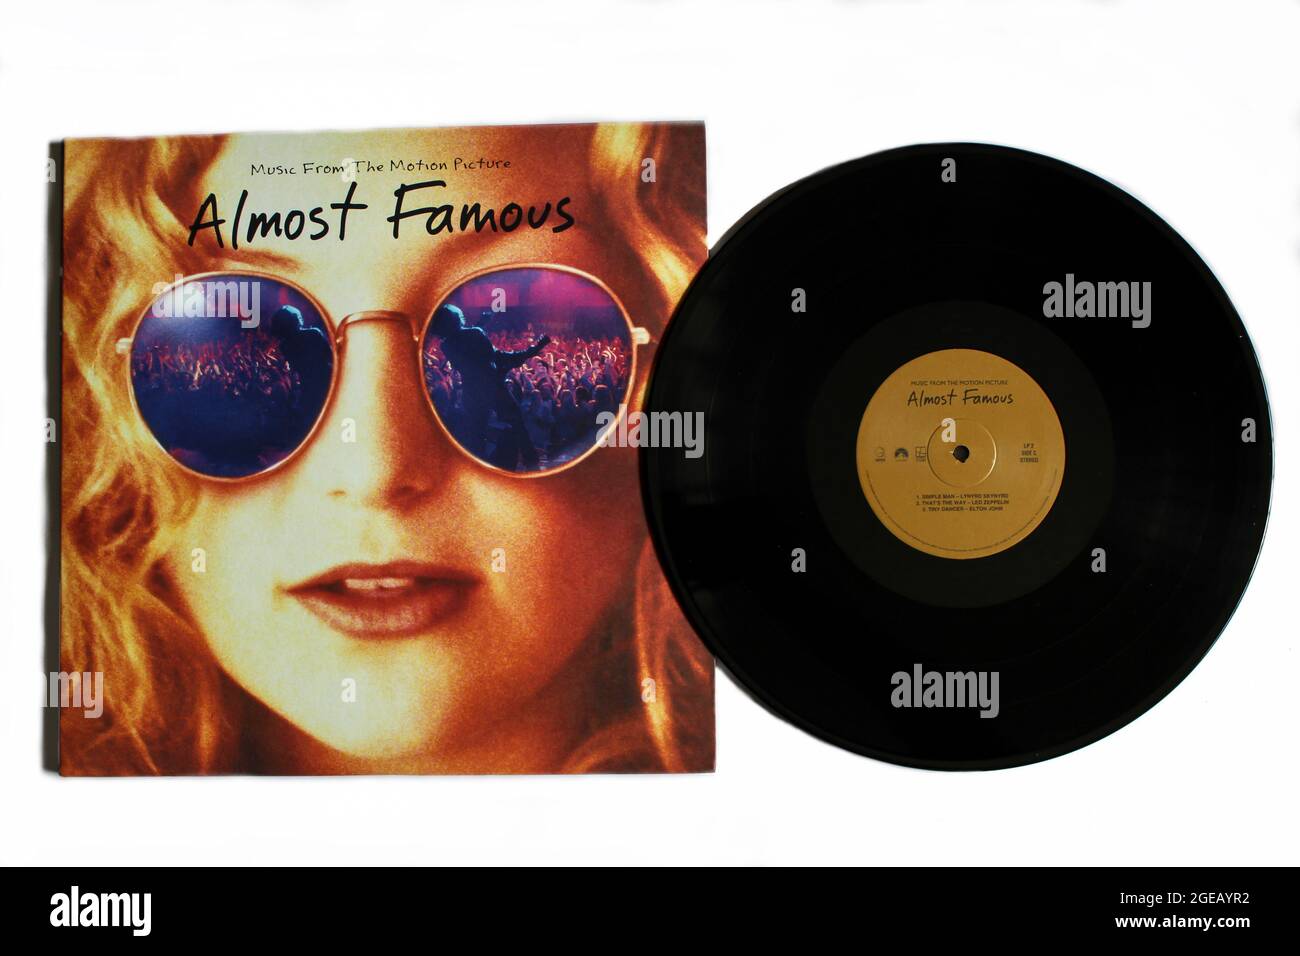 Almost Famous is an American comedy-drama film directed by Cameron Crowe. Teenage journalist writing for Rolling Stone. Vinyl record album cover Kate Stock Photo